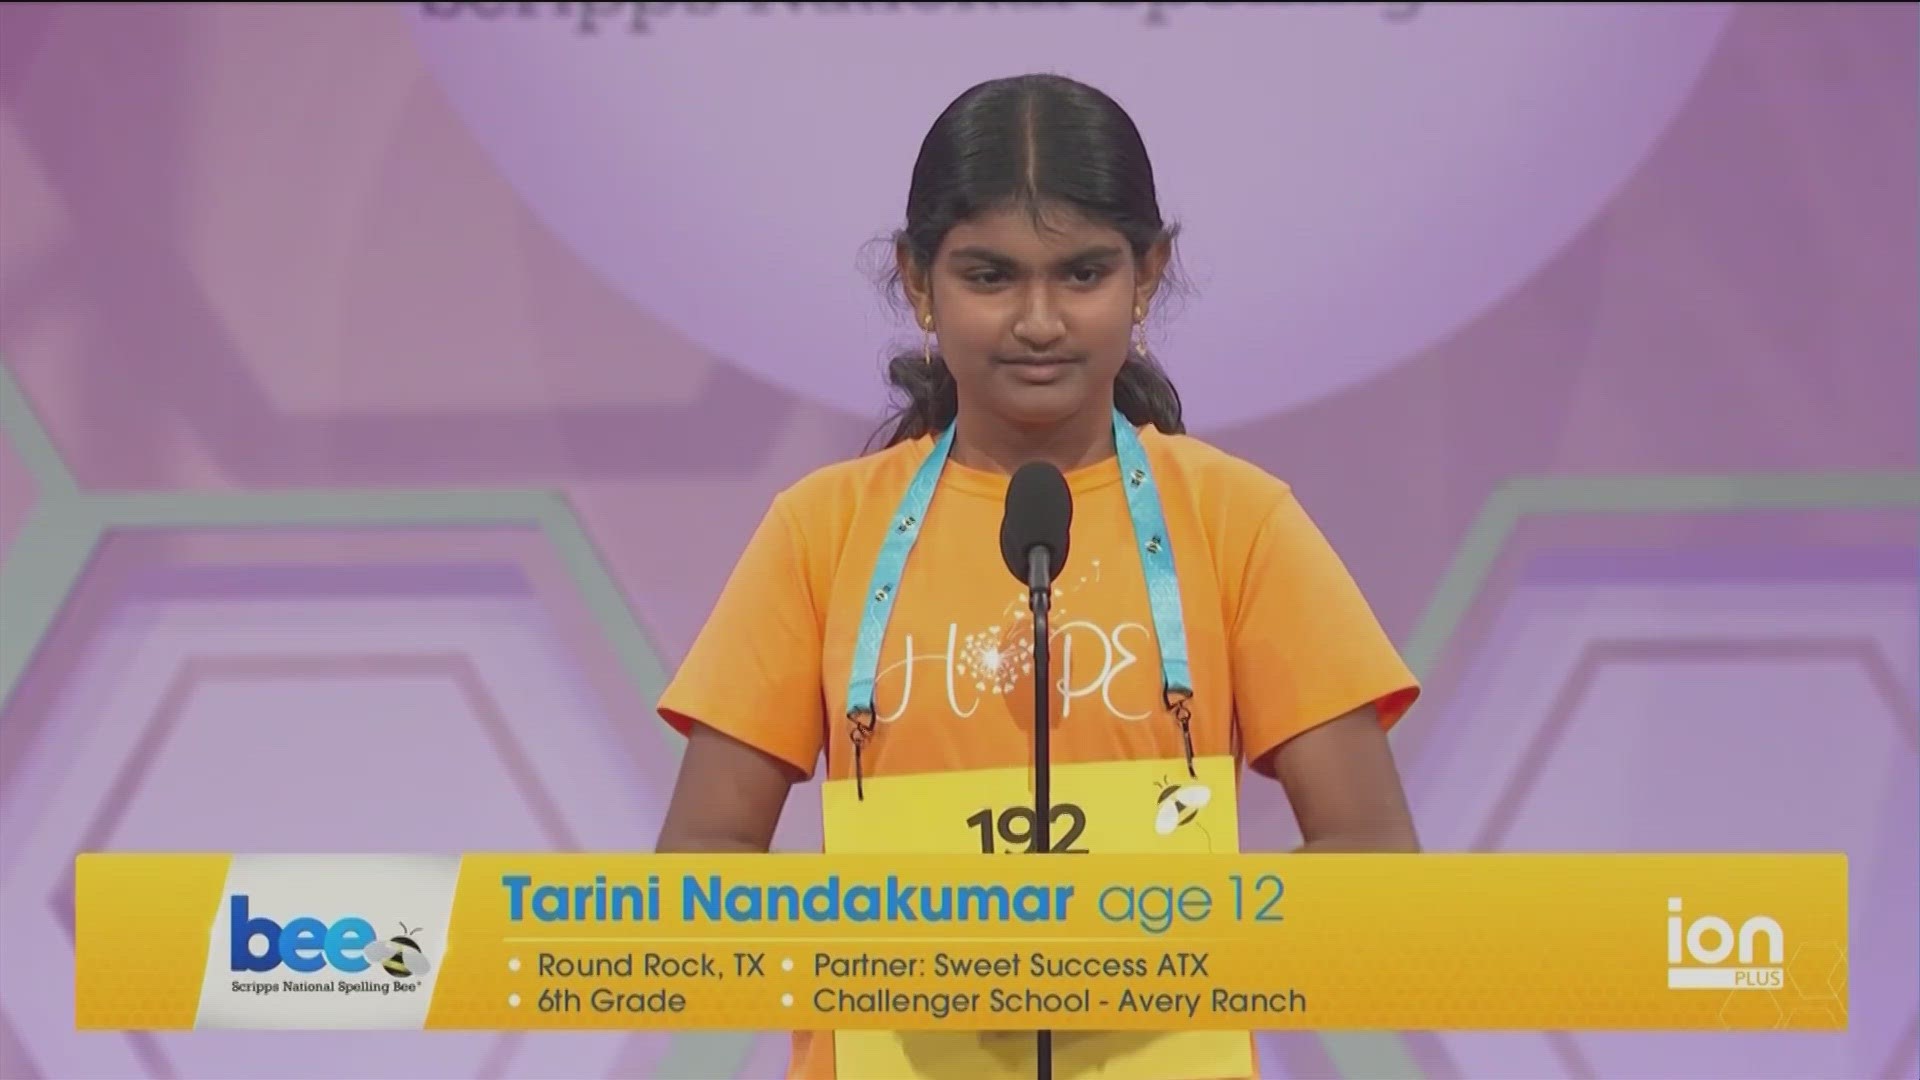 The quarterfinals of the Scripps National Spelling Bee start Wednesday morning. Two students from Austin made it through the preliminary round on Tuesday.